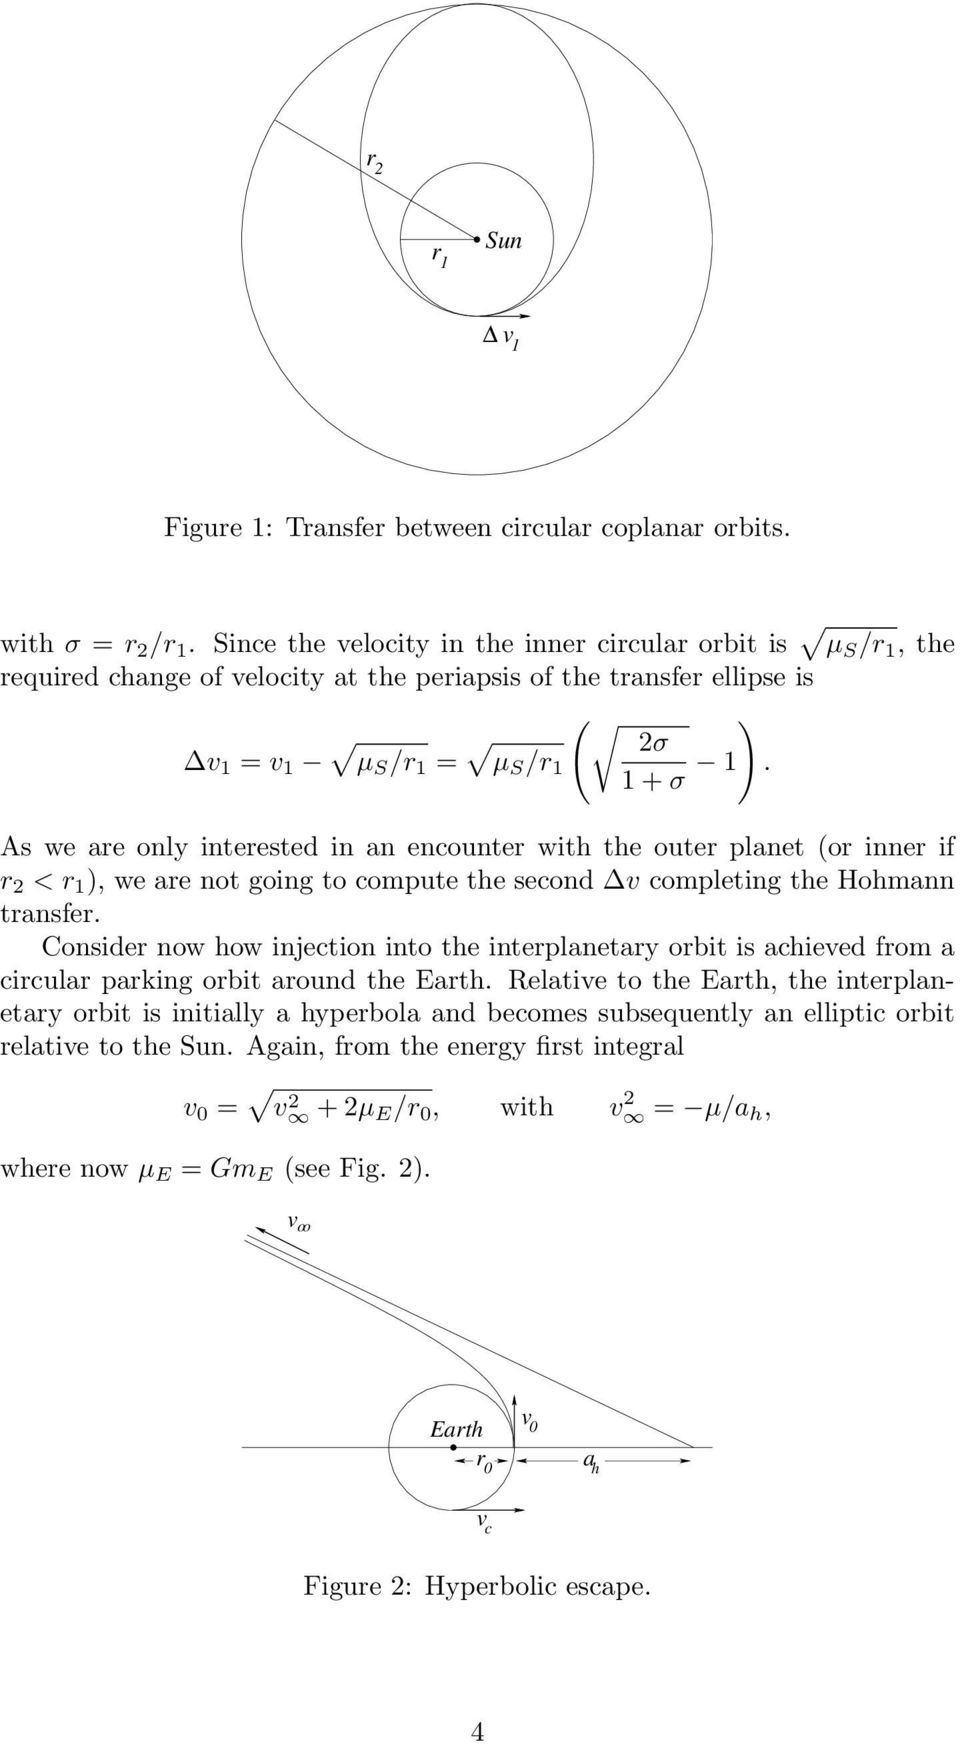 As we are only interested in an encounter with the outer planet (or inner if r 2 < r 1 ), we are not going to compute the second v completing the Hohmann transfer.